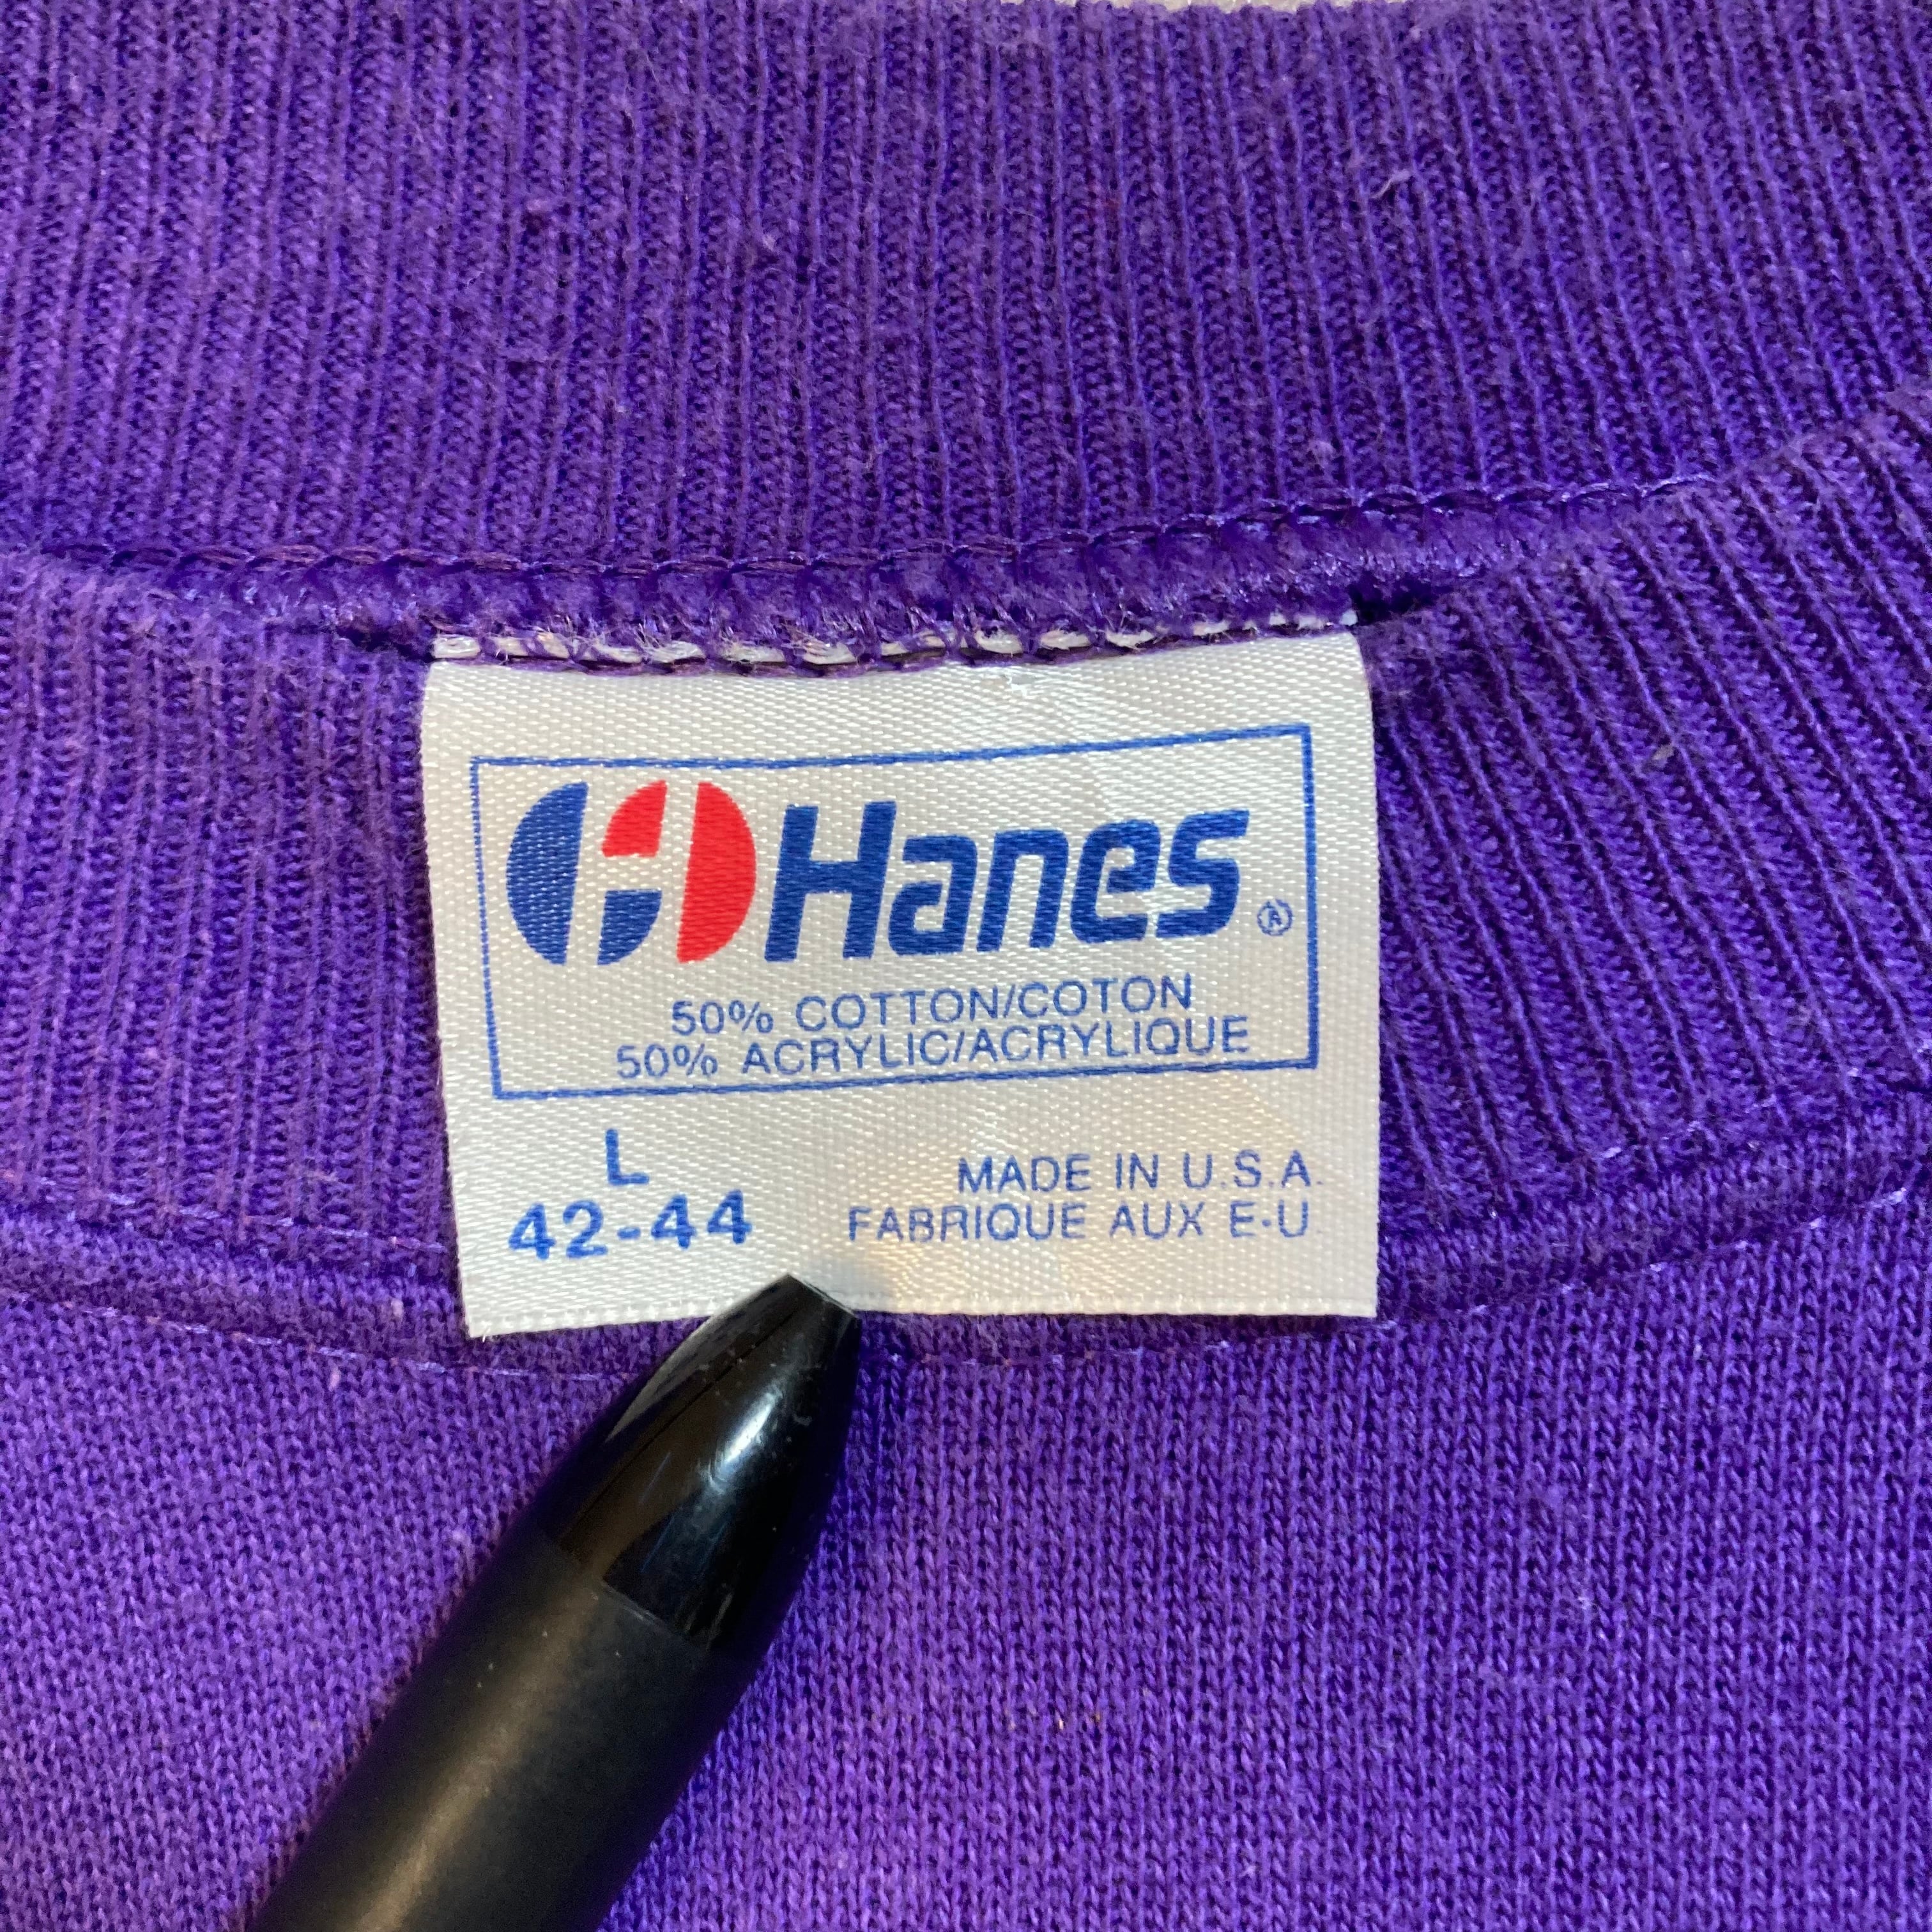 【Hanes】L/S Sweat L Made in USA 80s “旧約聖書” ヘインズ スウェット トレーナー バックプリント 両面プリント  USA製 vintage ヴィンテージ アメリカ USA 古着